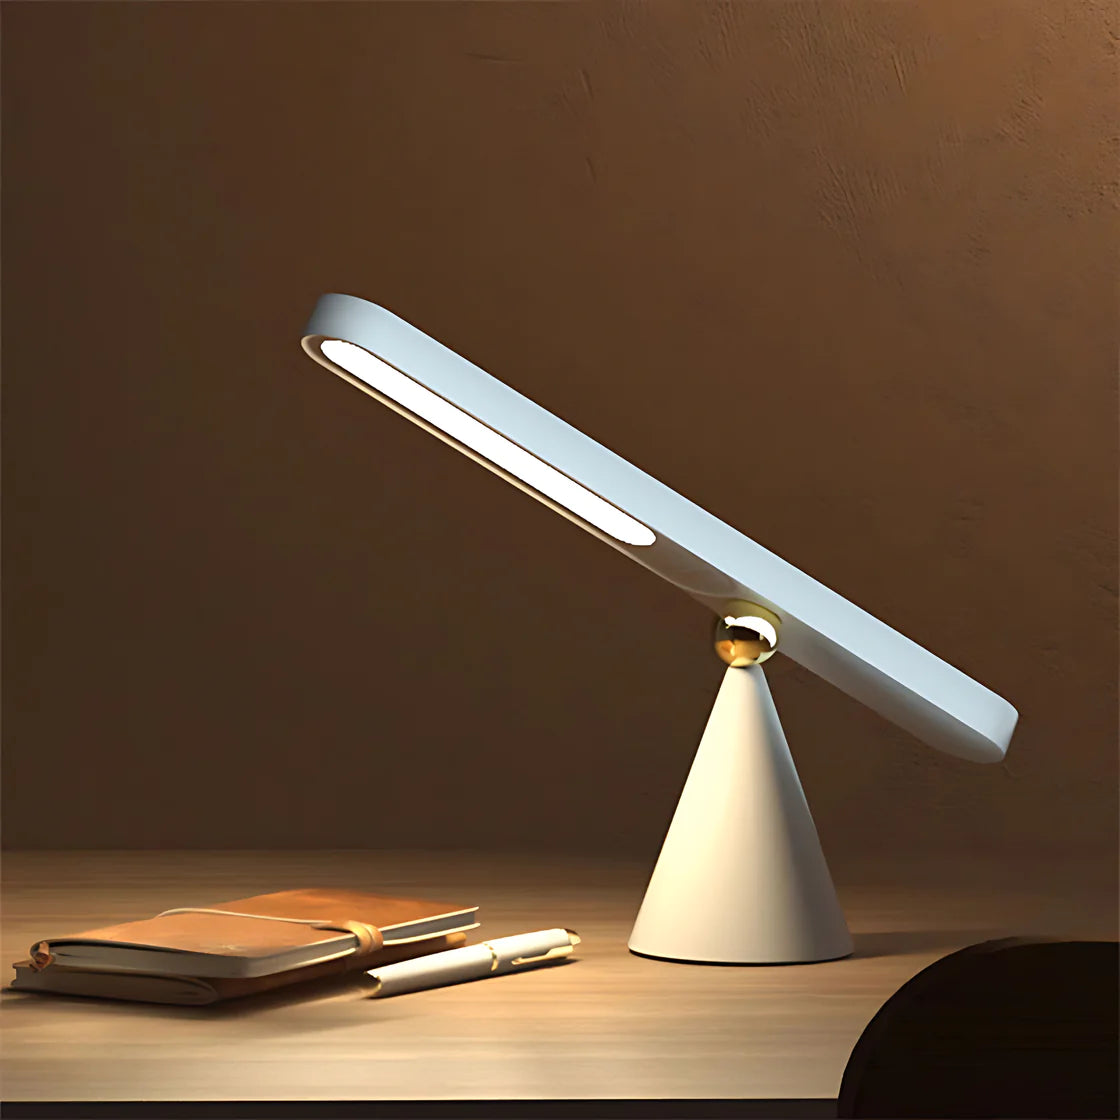 Magnetic Wall Lamp